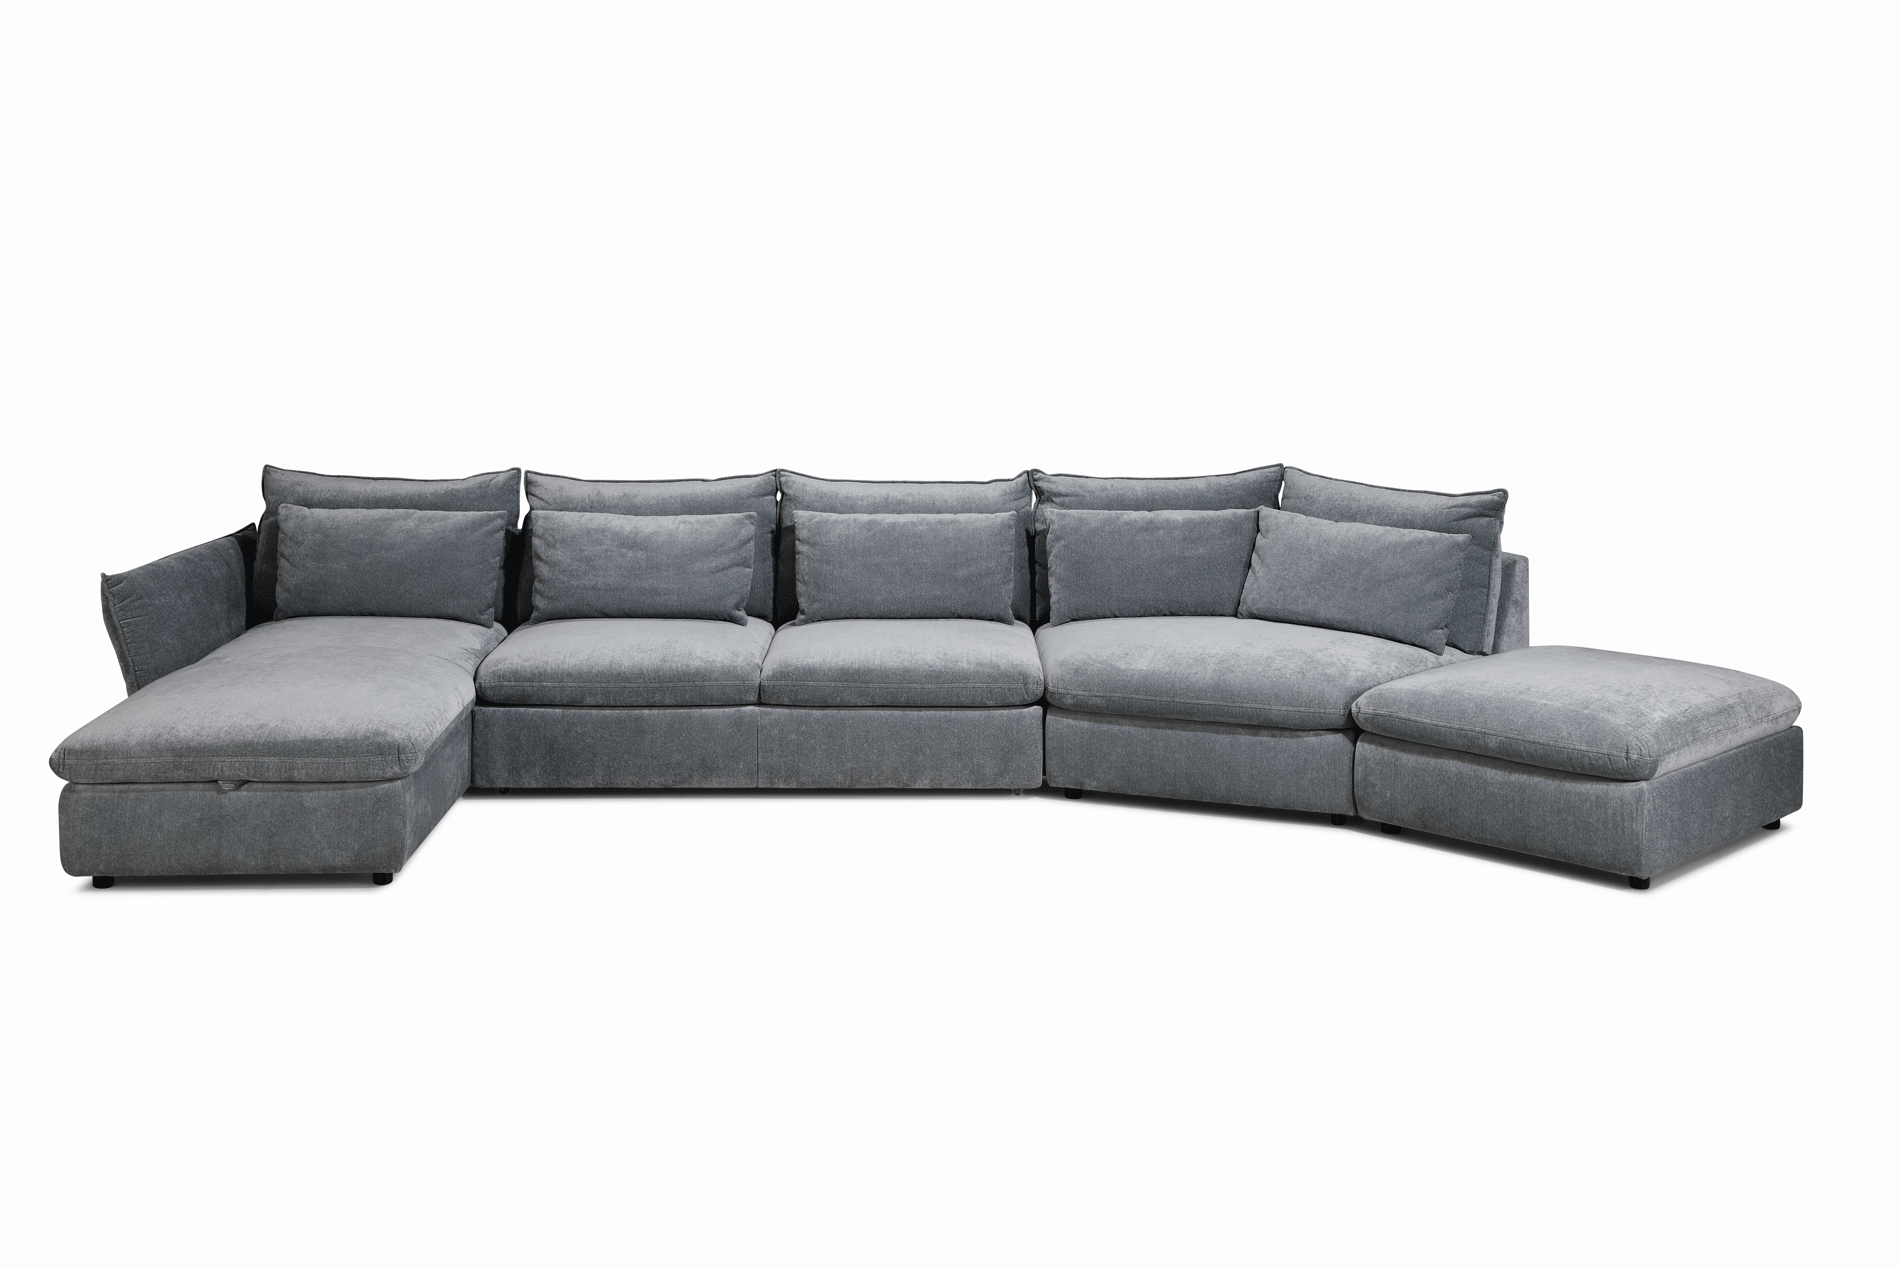 Living Room Furniture Sofas Loveseats and Chairs Idylla Sectional w/ Bed & storage